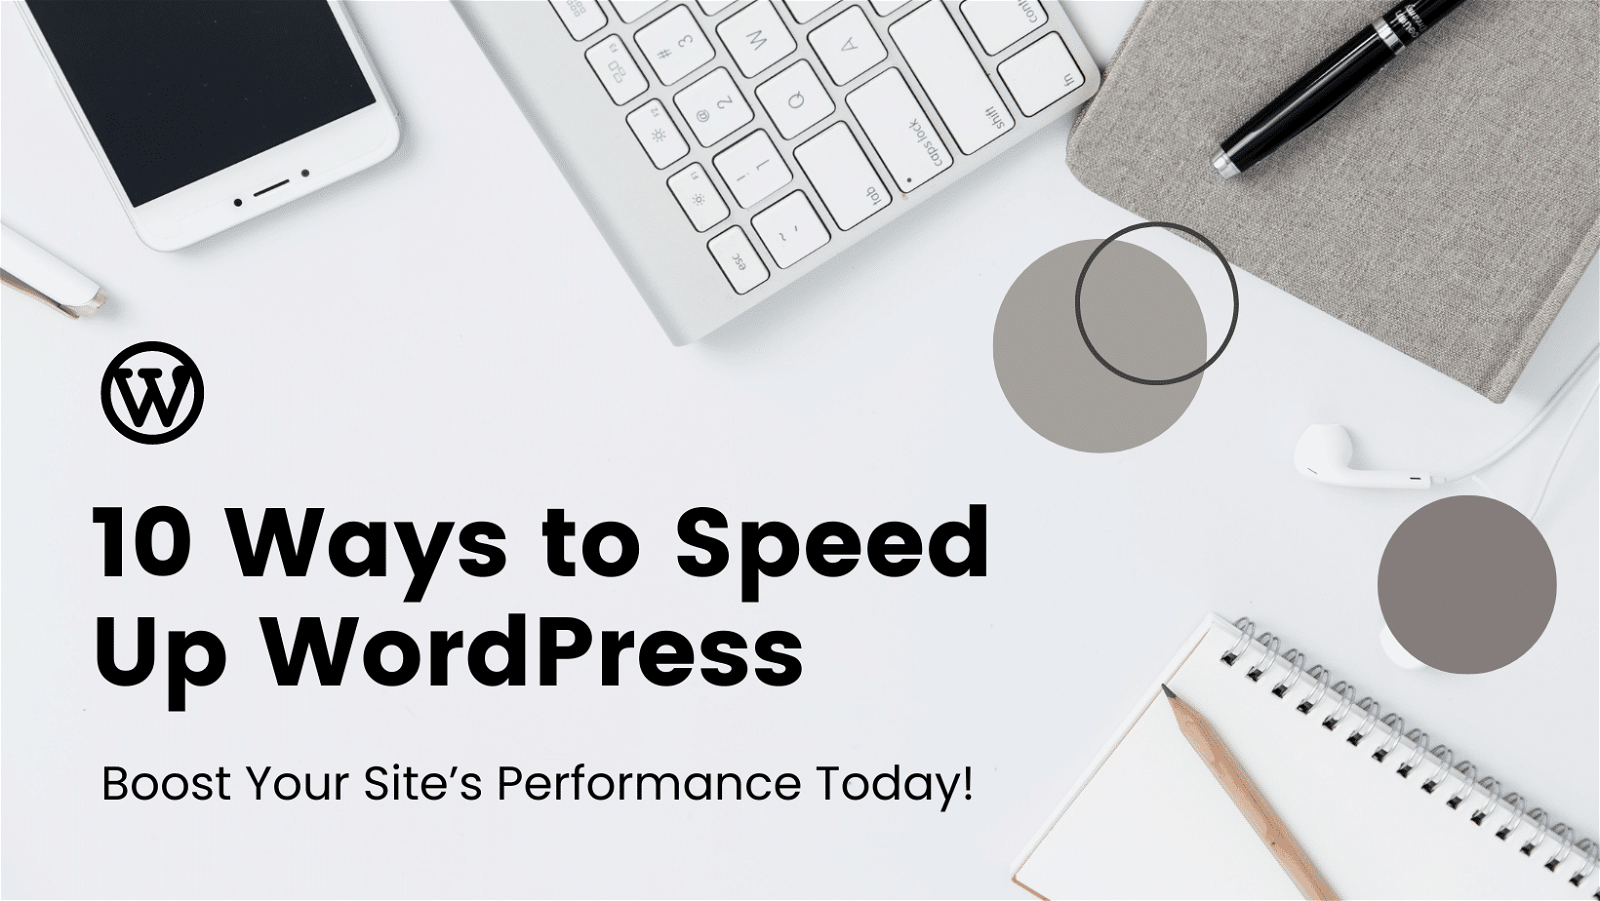 Discover the ultimate techniques to speed up WordPress and reduce website loading time by implementing these 10 proven strategies.